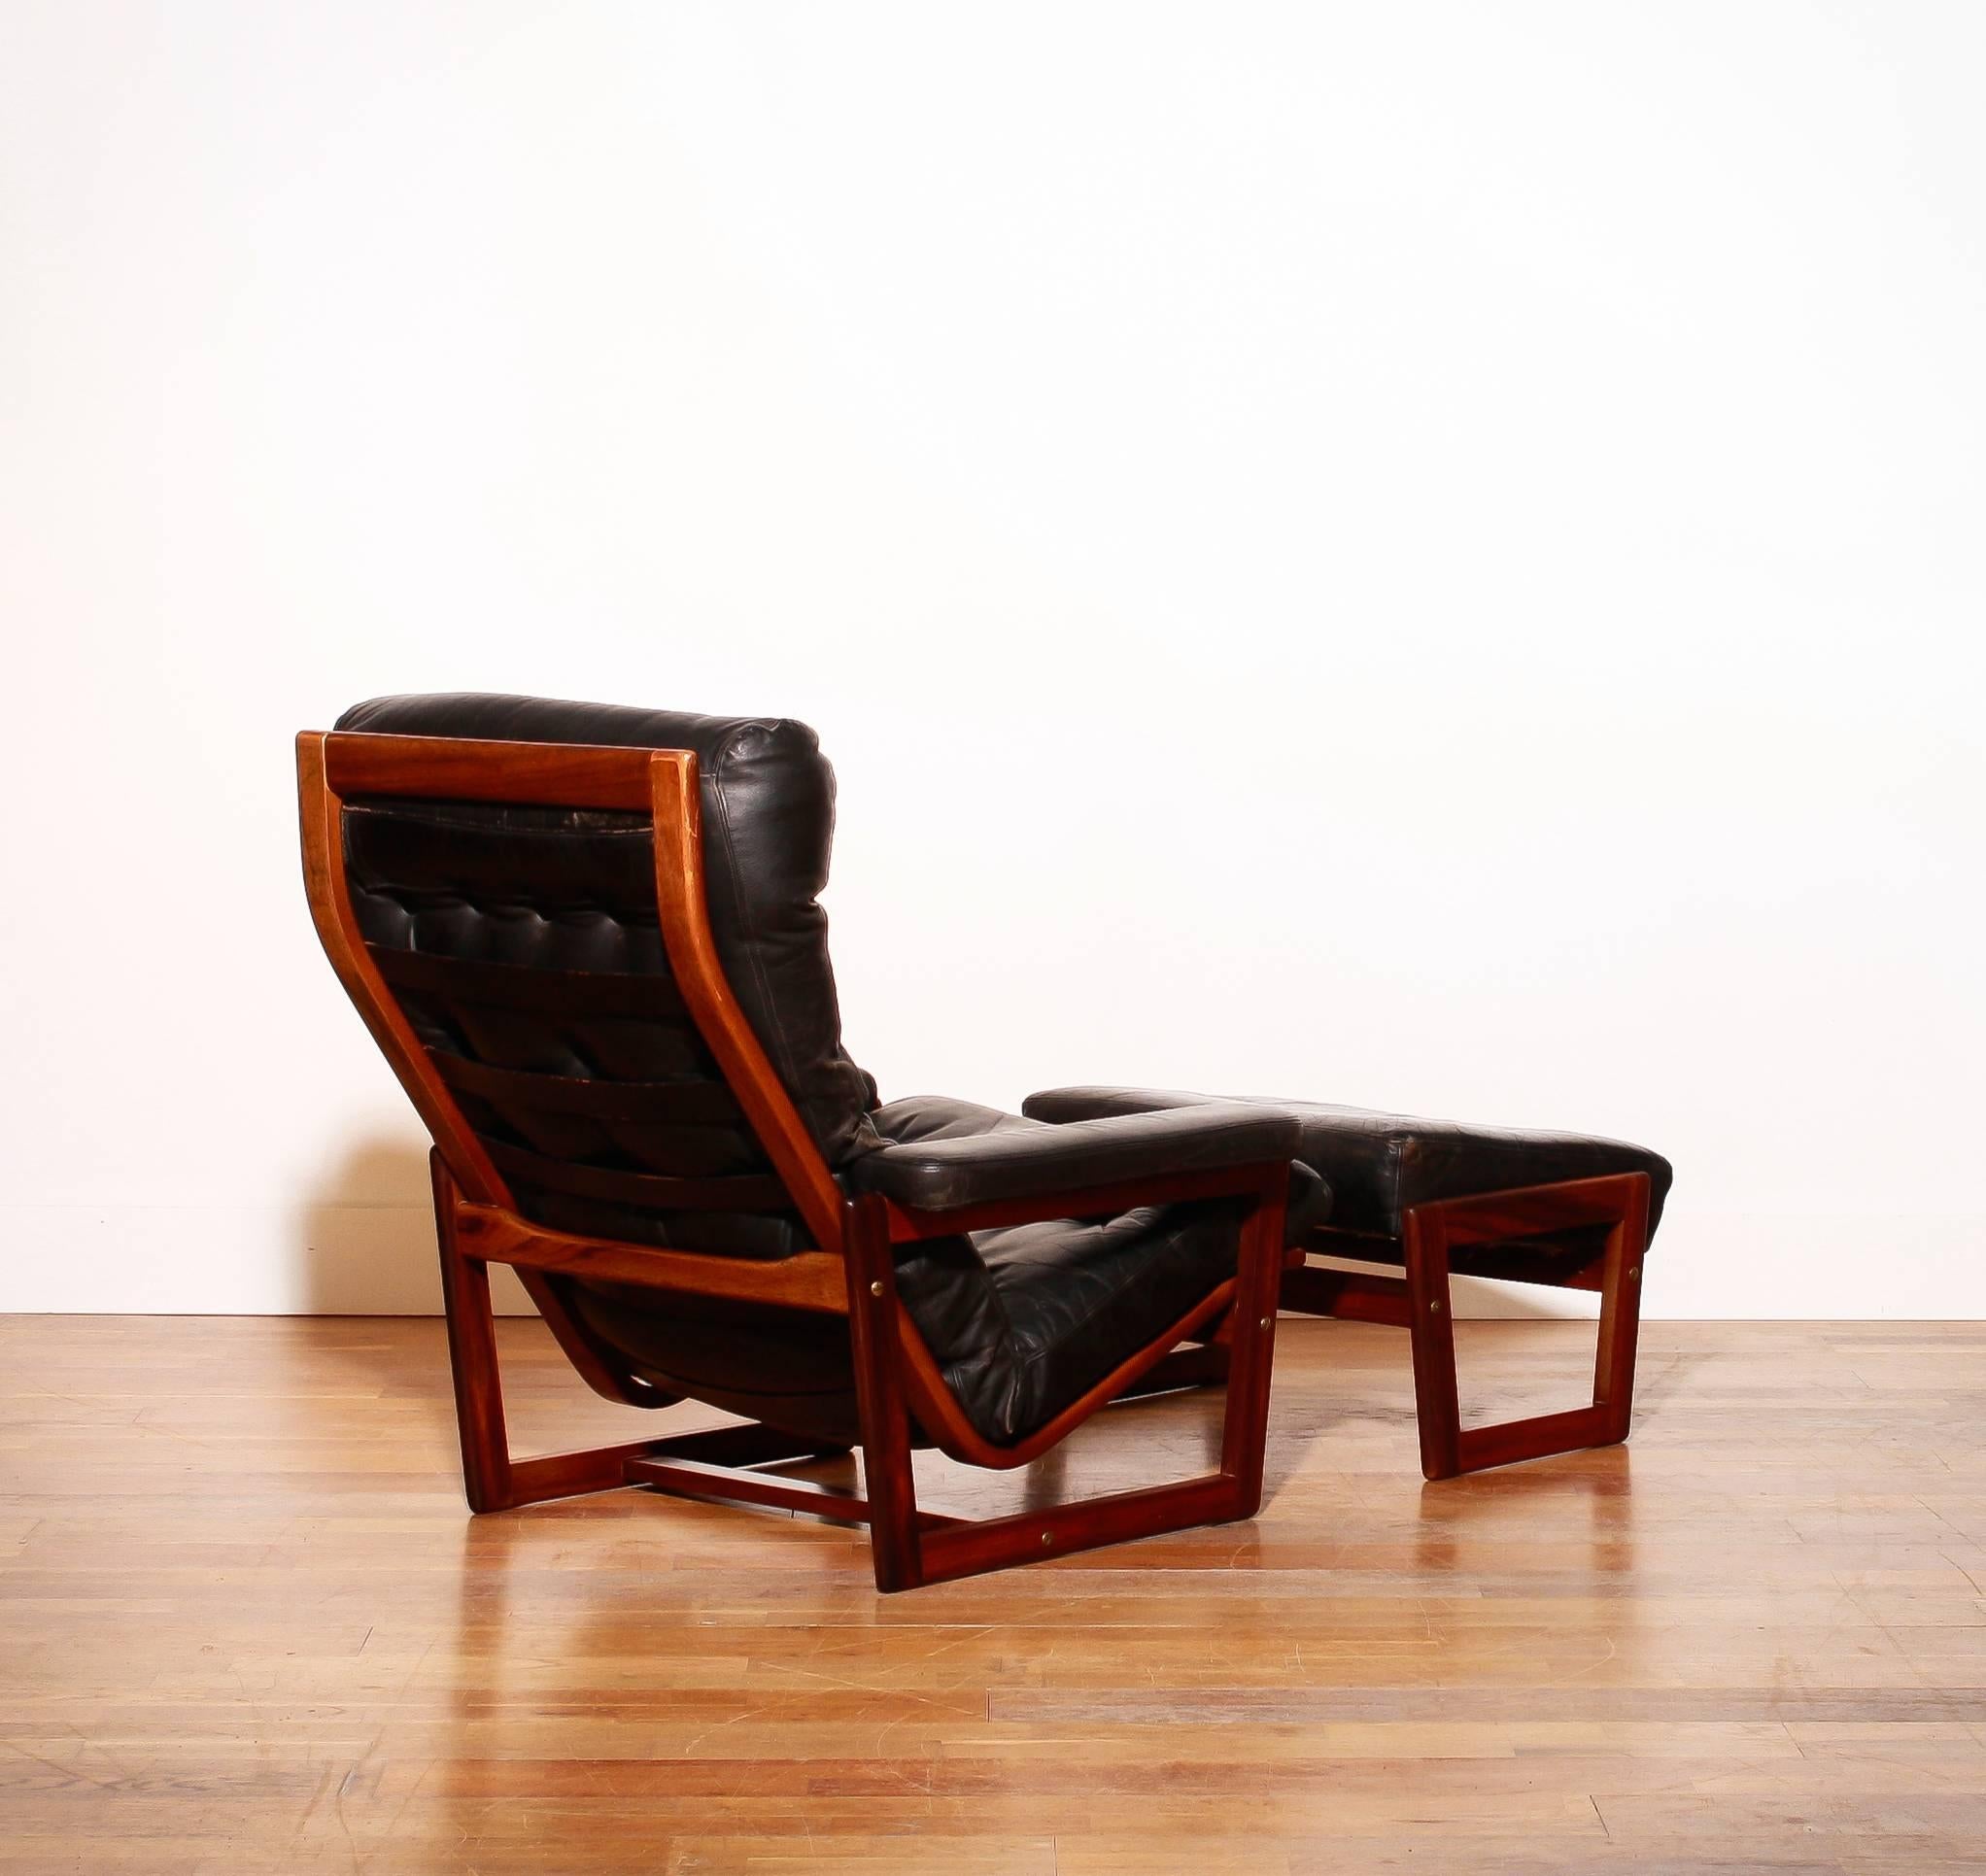 Mid-20th Century 1950s-1960s, Lennart Bender for Ulferts, Leather Lounge Chair with Ottoman